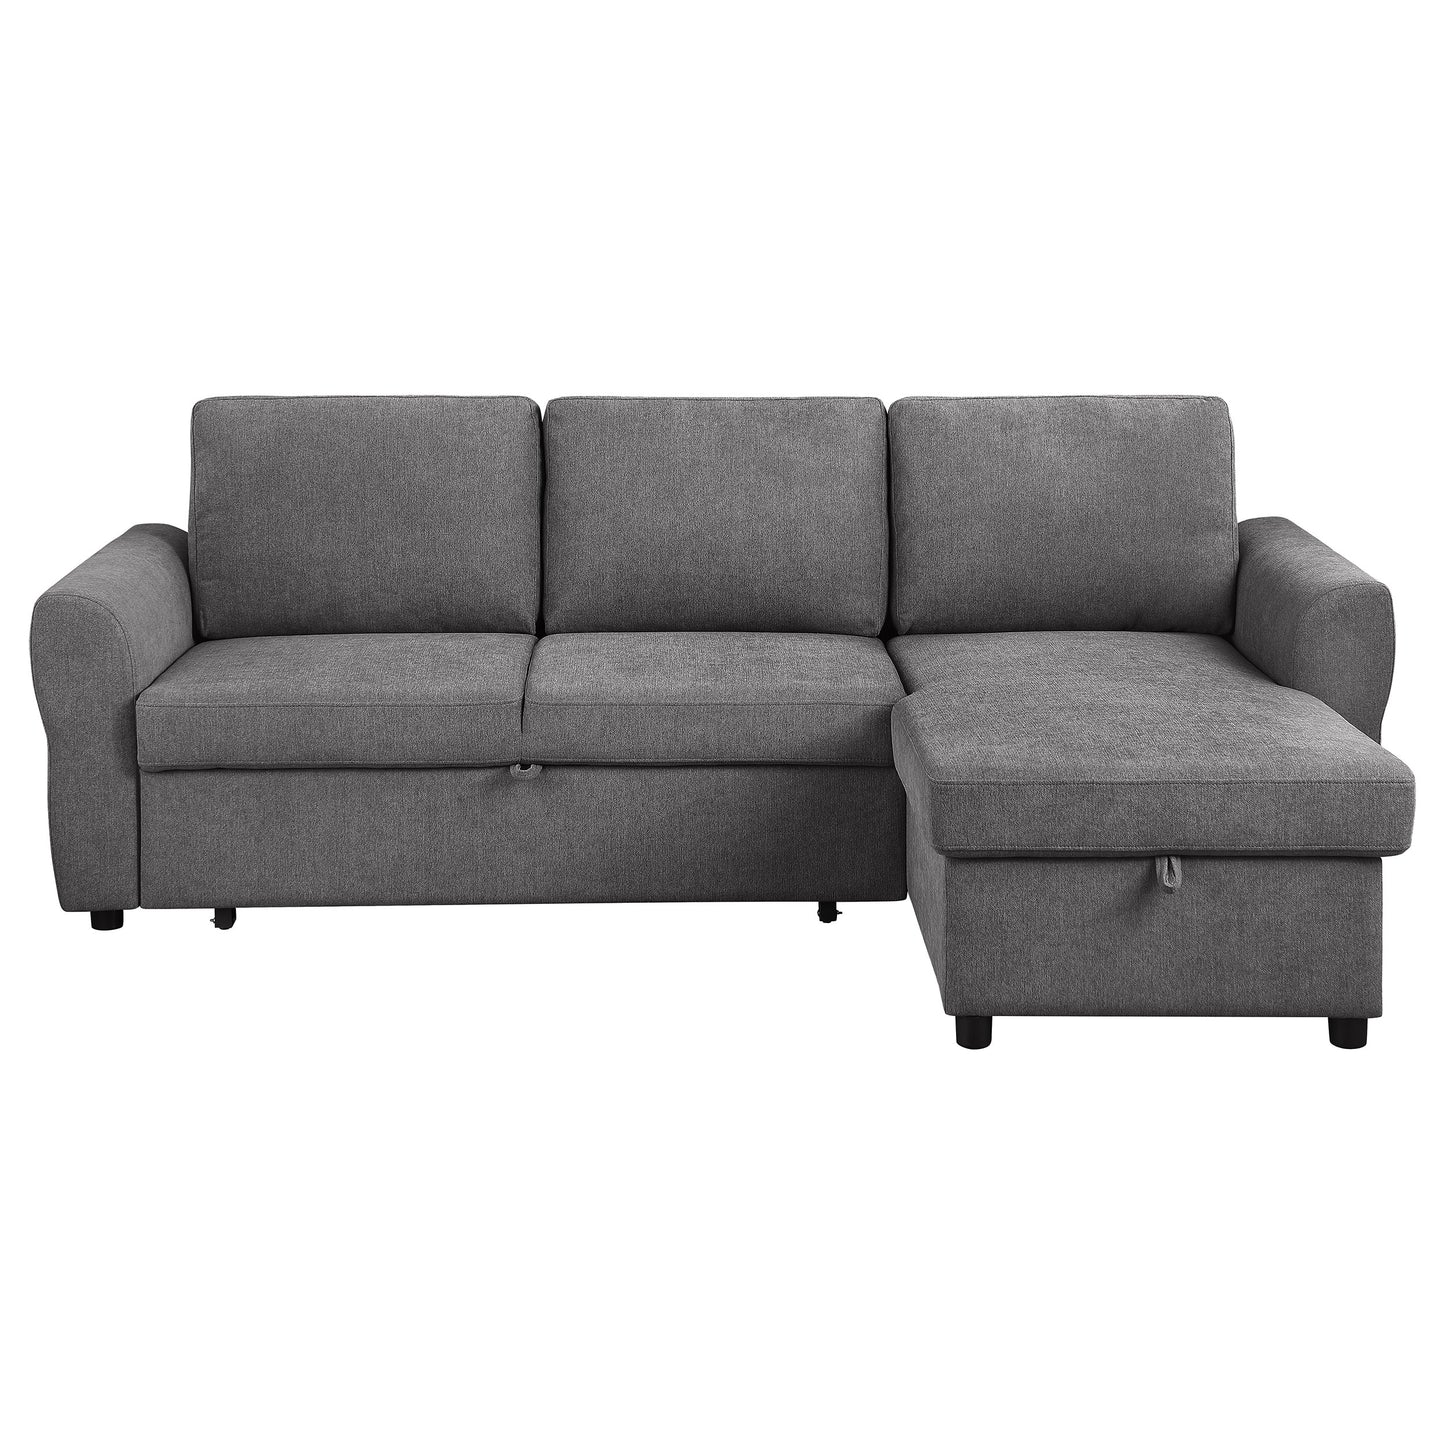 Samantha Upholstered Sleeper Sofa Sectional with Storage Chaise Grey